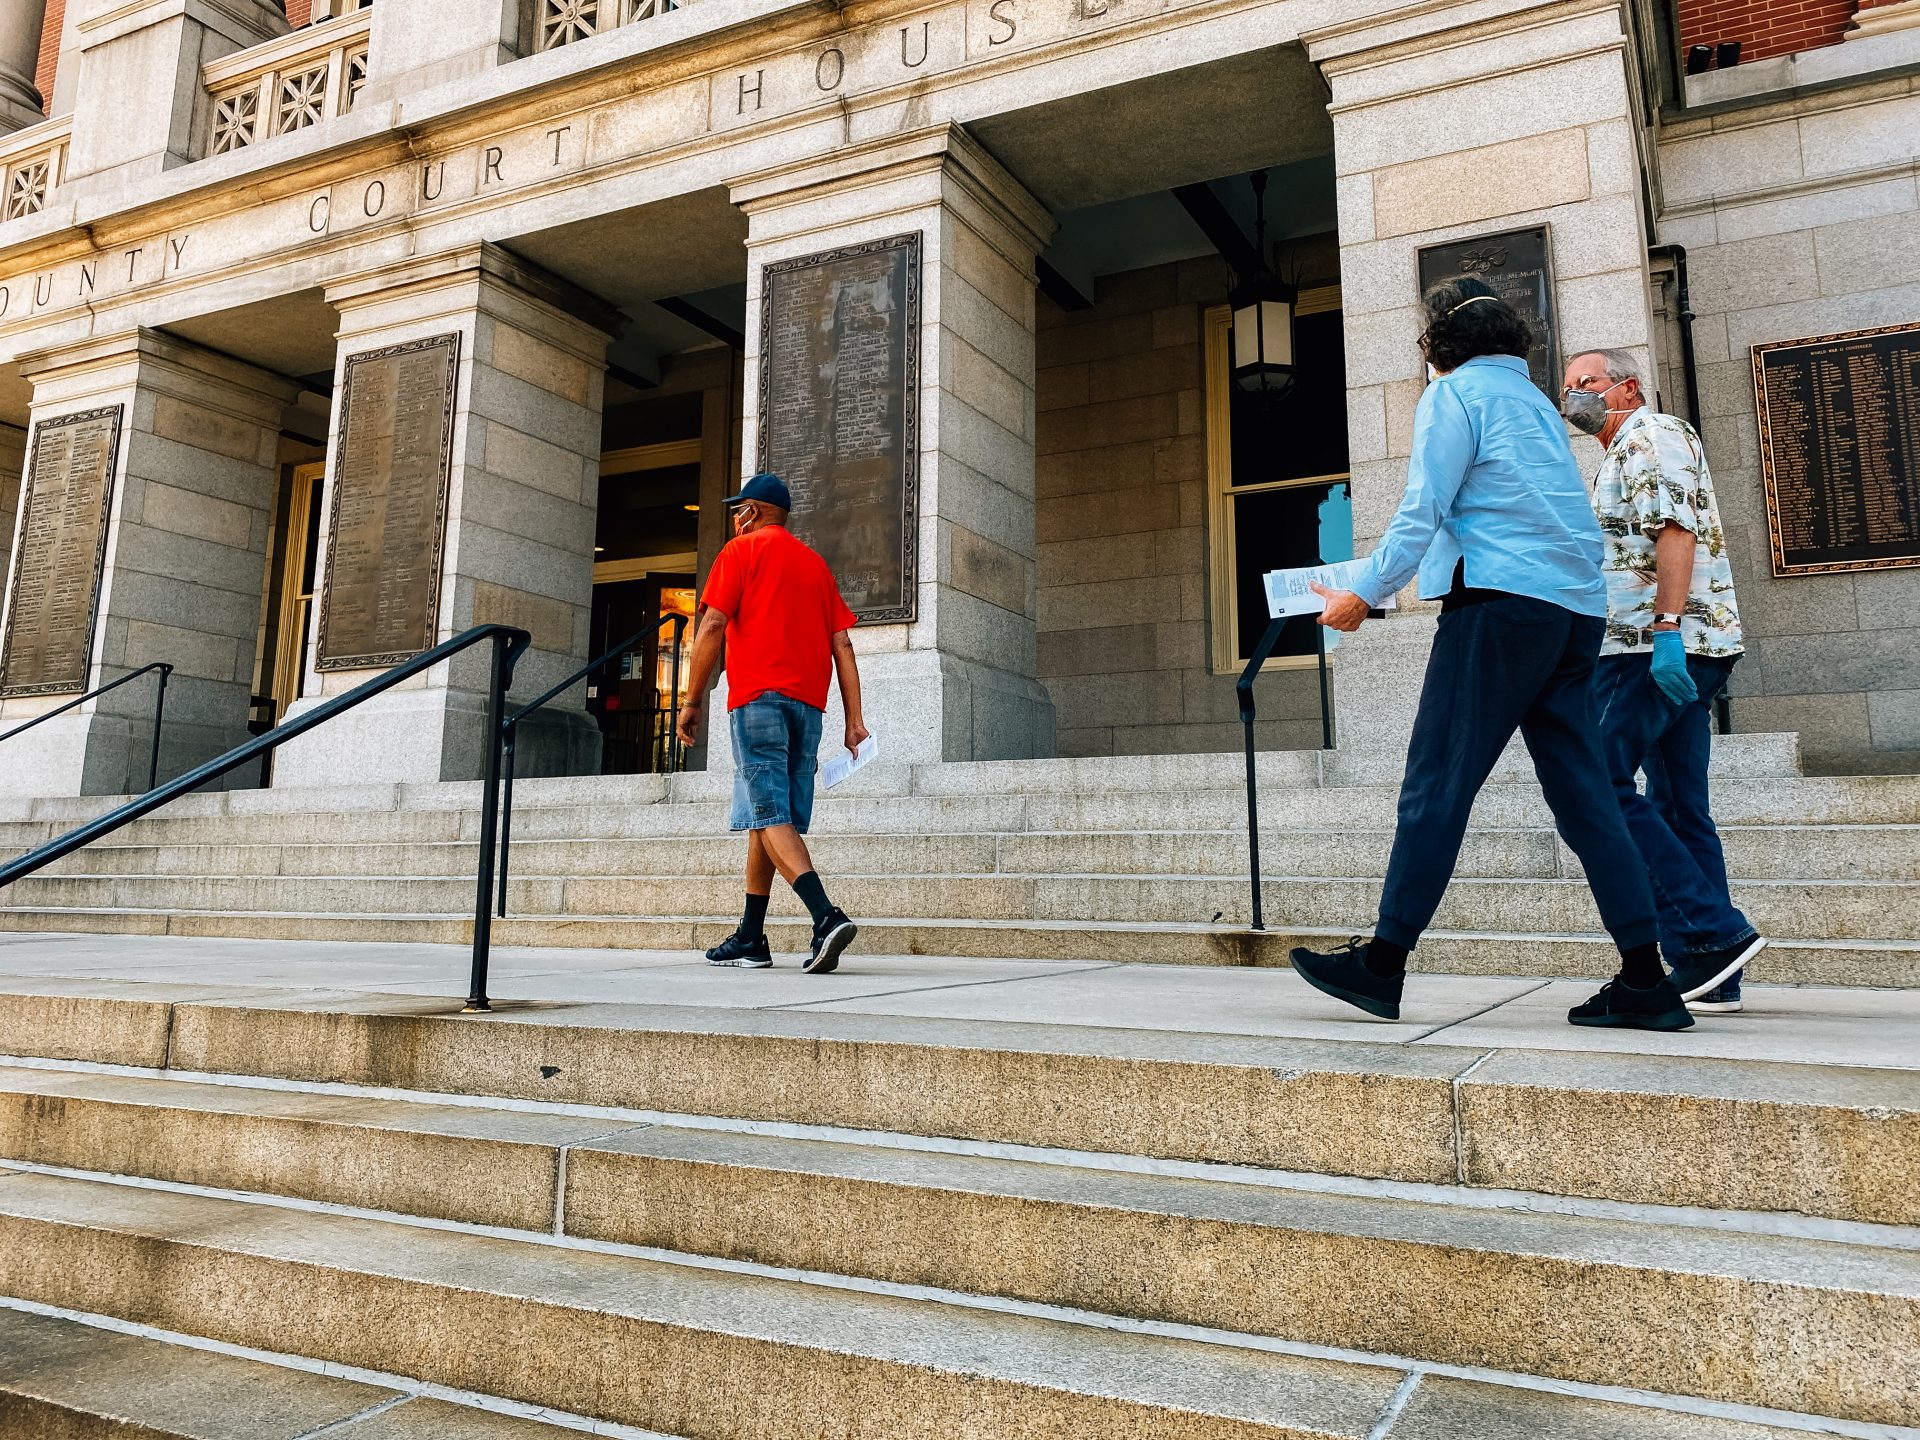 Voters walk along the steps of the York County Courthouse on June 1, 2020, to deposit their ballots in a drop box ahead of the Pennsylvania primary.